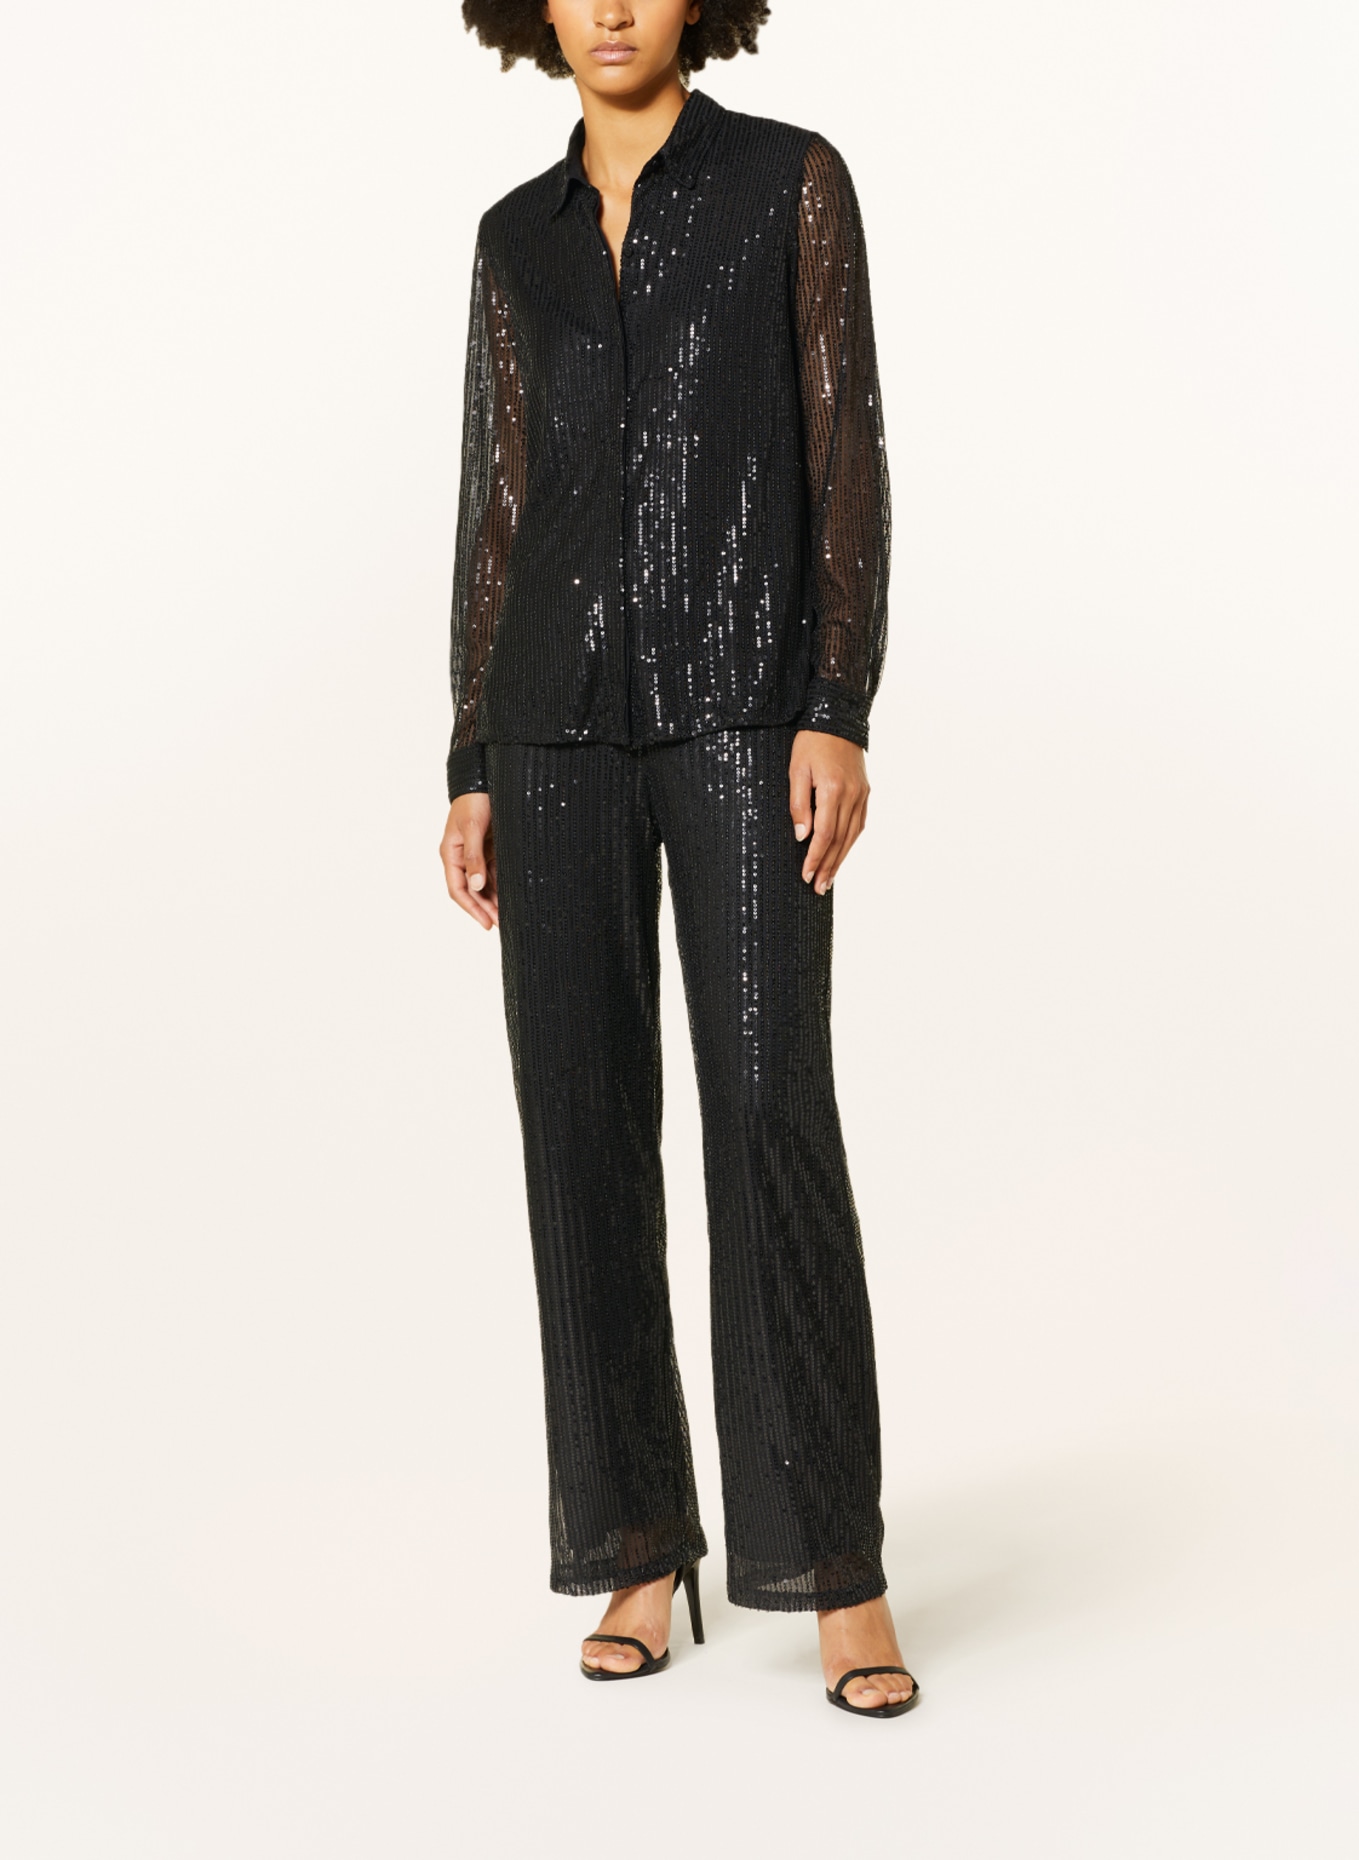 Princess GOES HOLLYWOOD Shirt blouse made of mesh with sequins, Color: BLACK (Image 2)